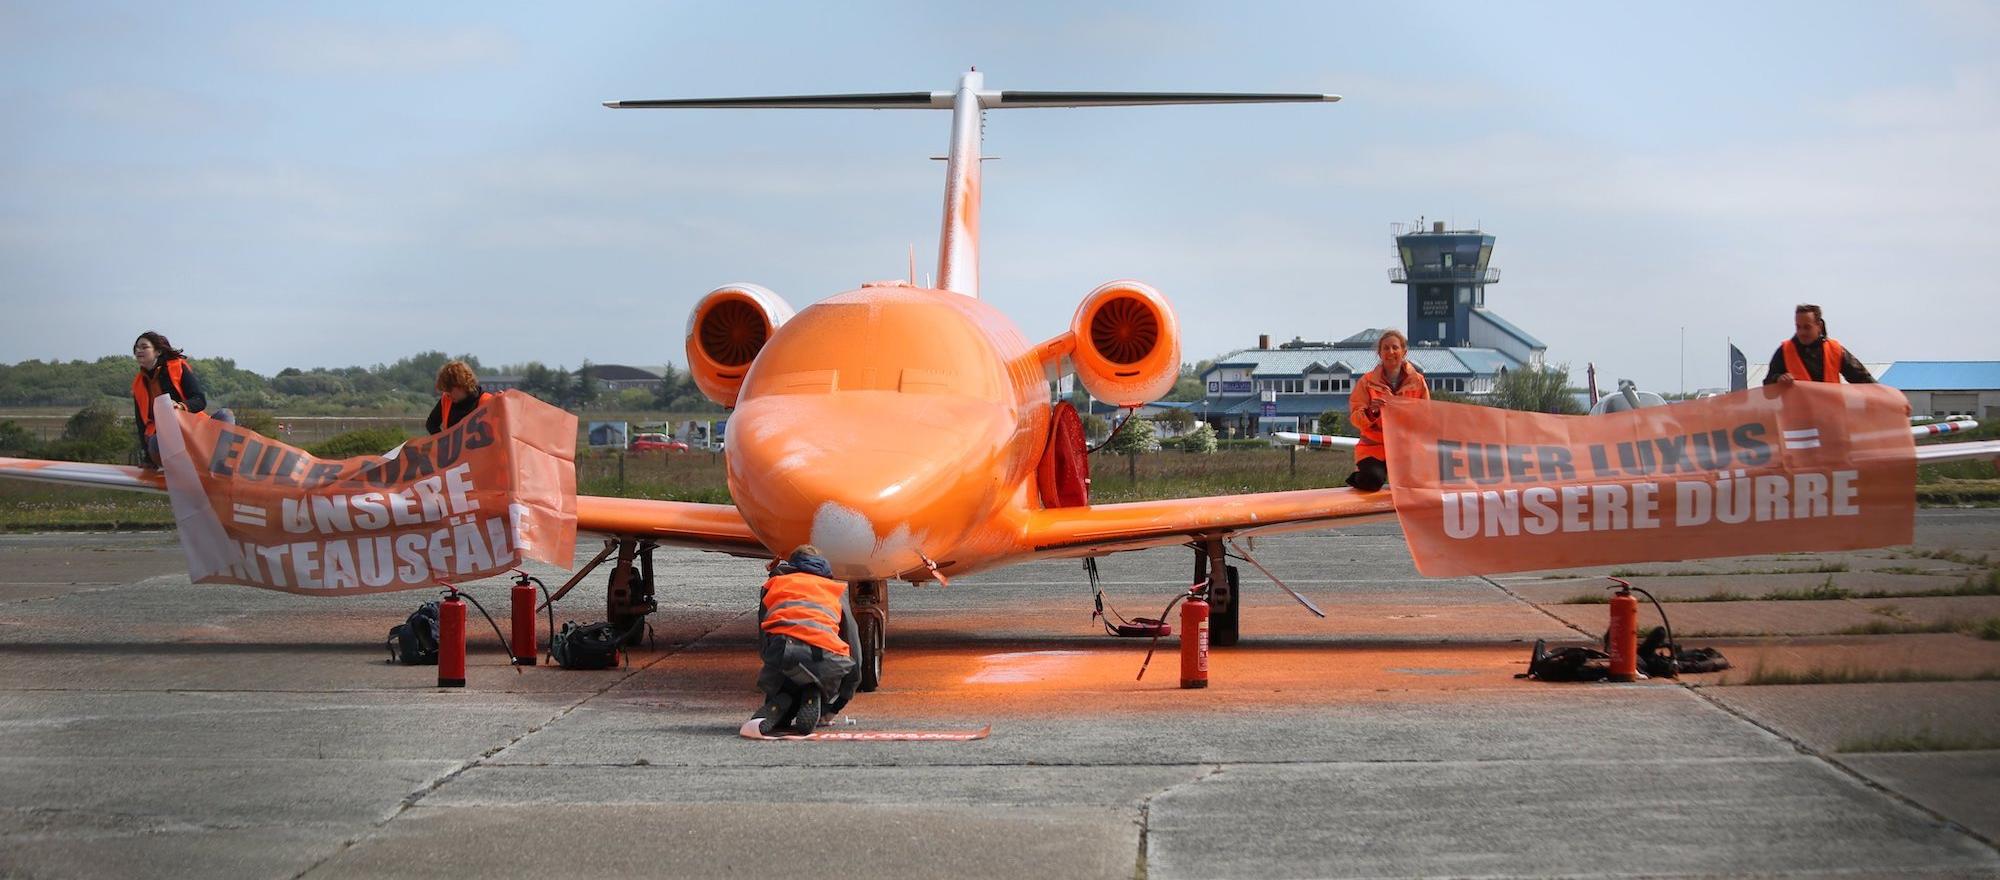 German protestors sprayed a Citation jet with paint at Sylt Airport.